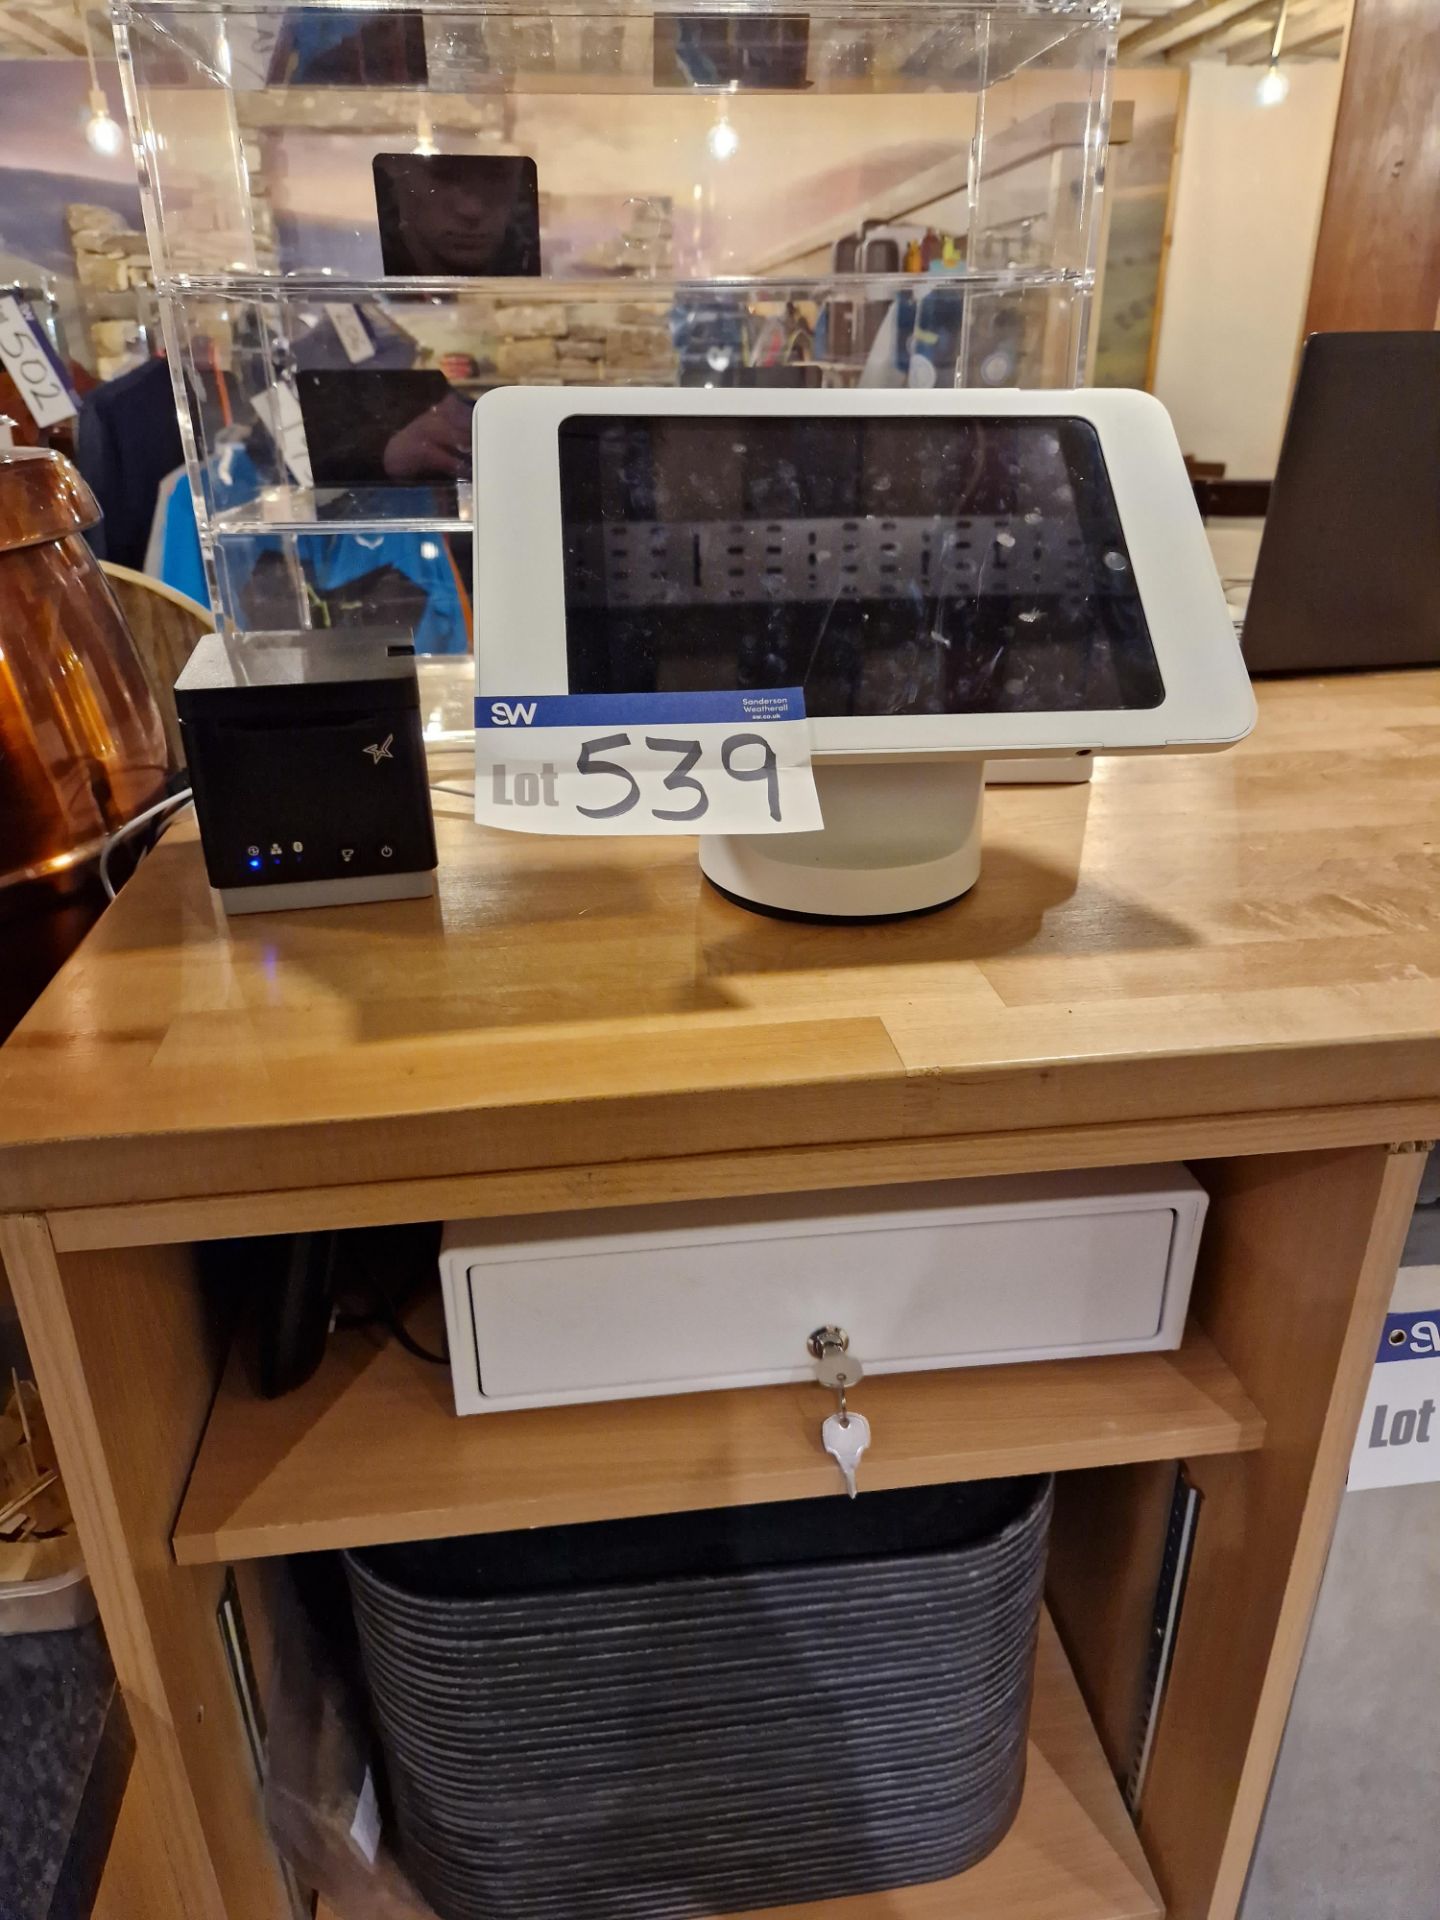 Zettle EPOS System with Cash Drawer, Receipt Printer and iPad Please read the following important